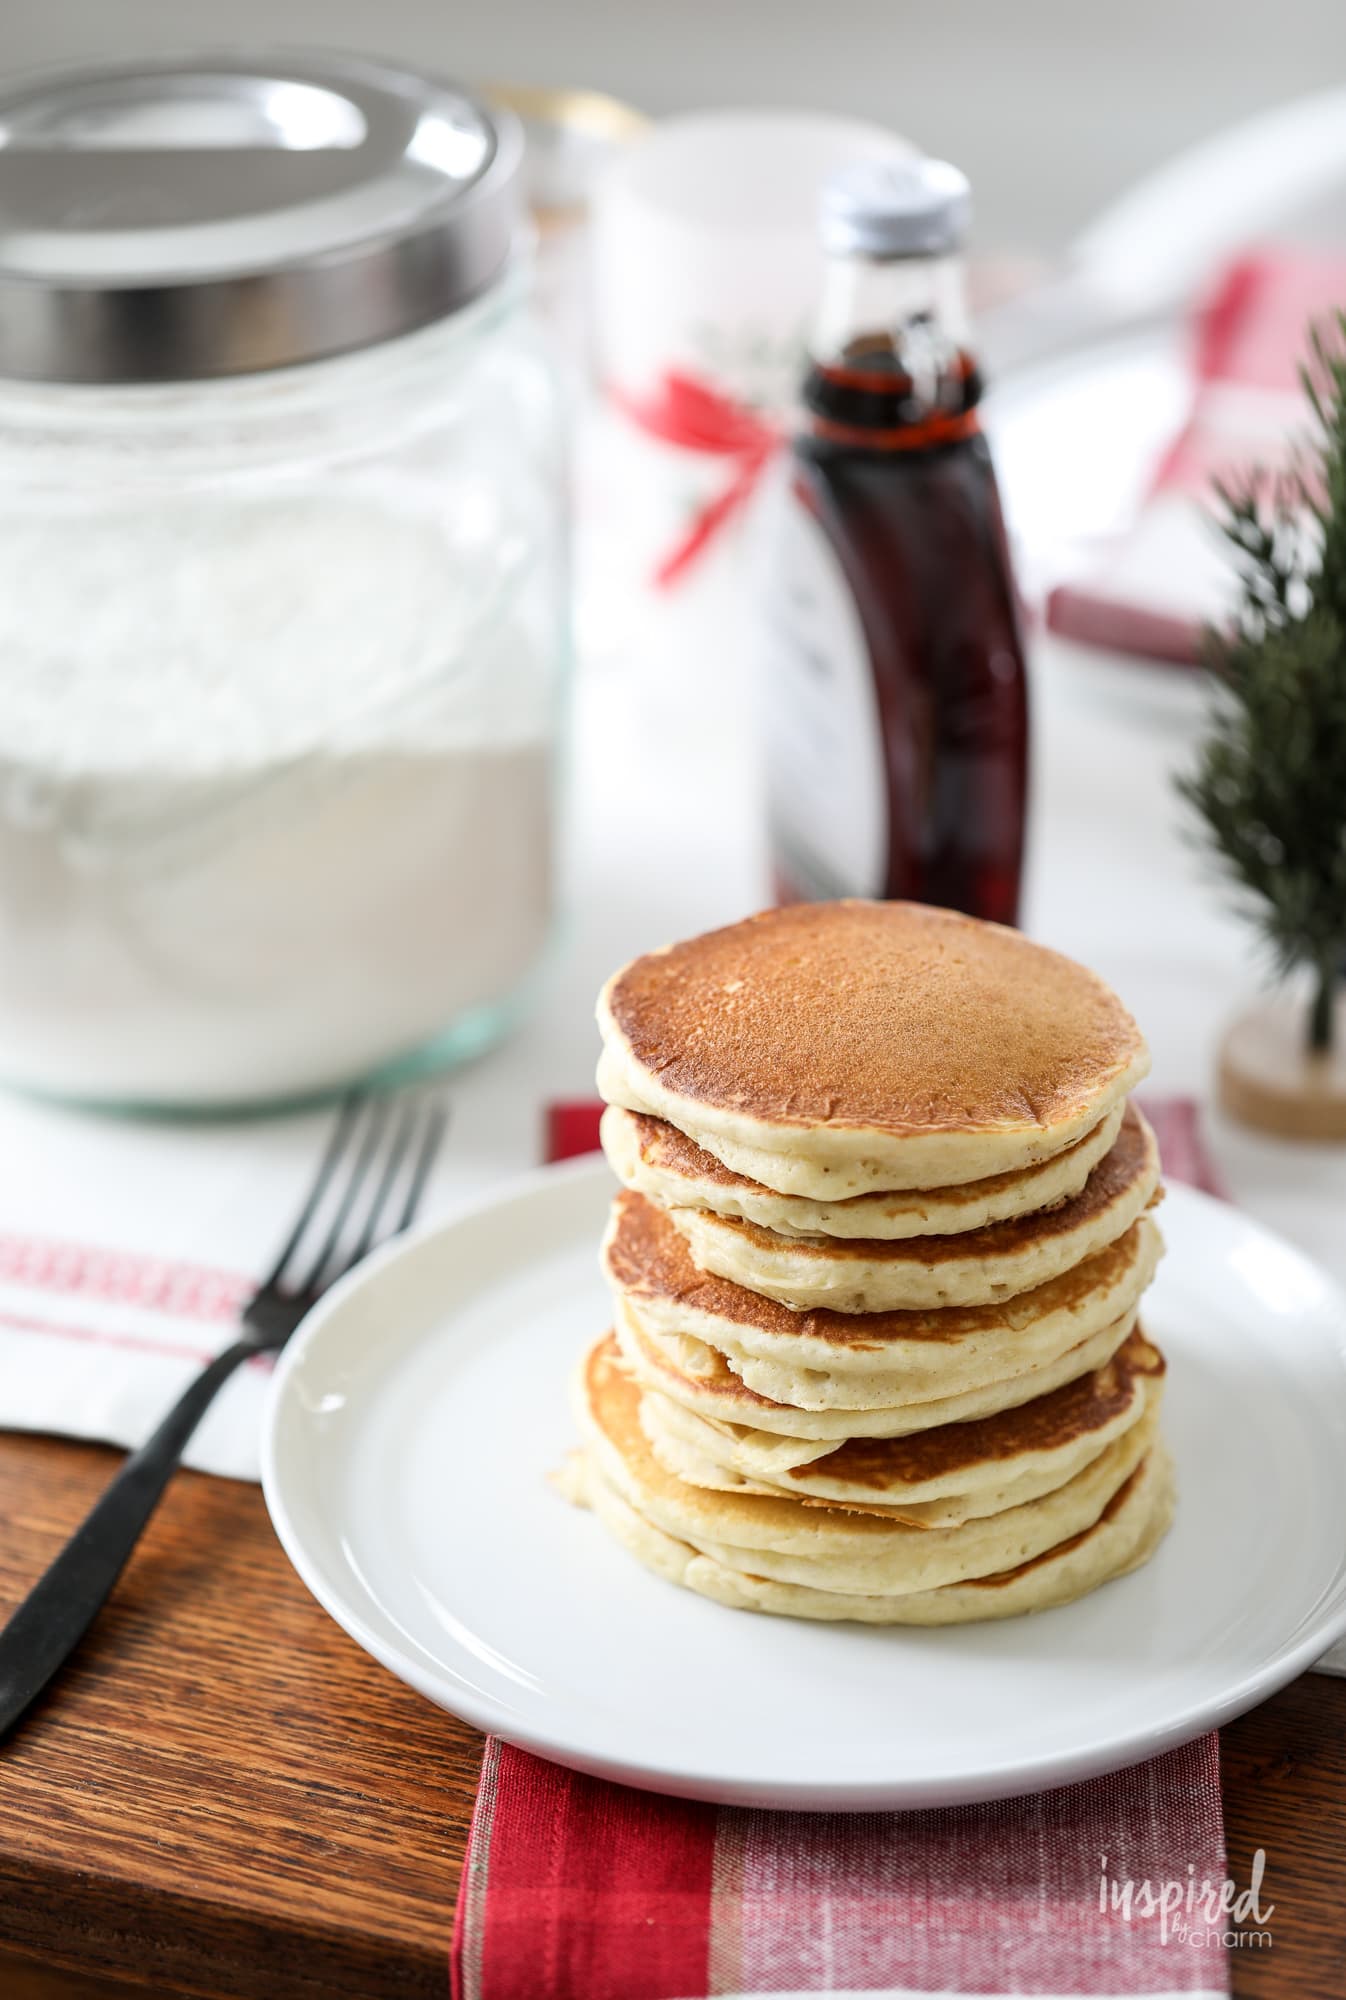 Learn how to make this easy and delicious Homemade Pancake Mix. #homemade #pancake #mix #breakfast #recipe #pancakes  